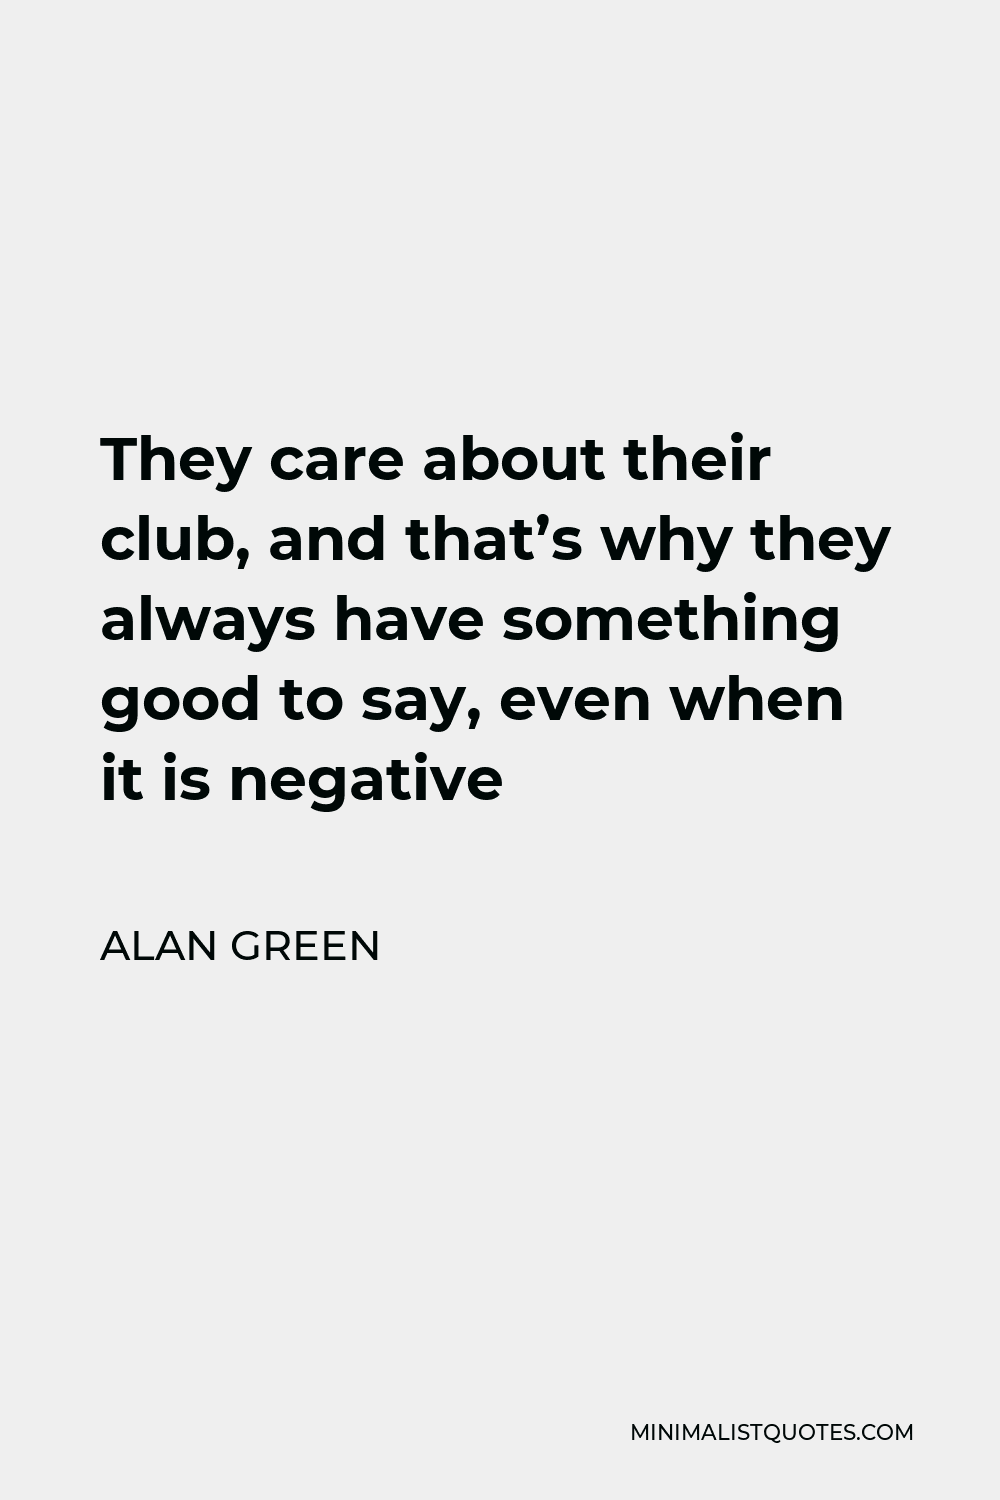 Alan Green Quote - They care about their club, and that’s why they always have something good to say, even when it is negative